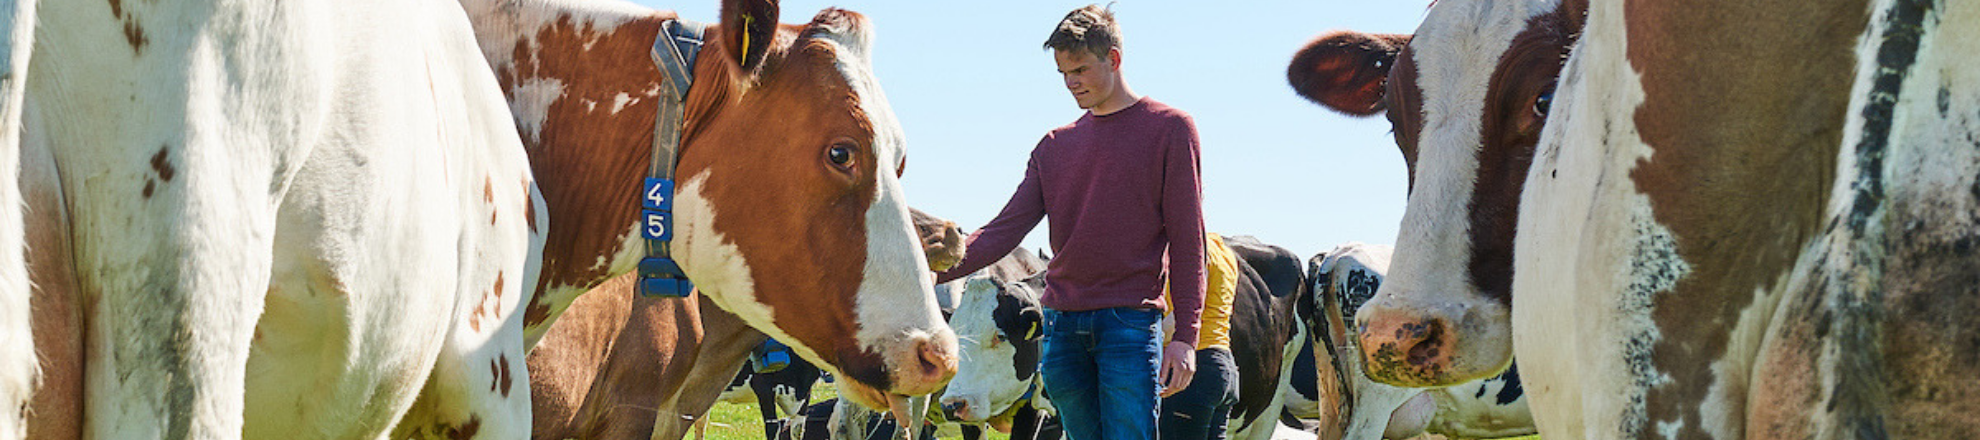 Students of Aeres University Applied Sciences Dronten outside with cows